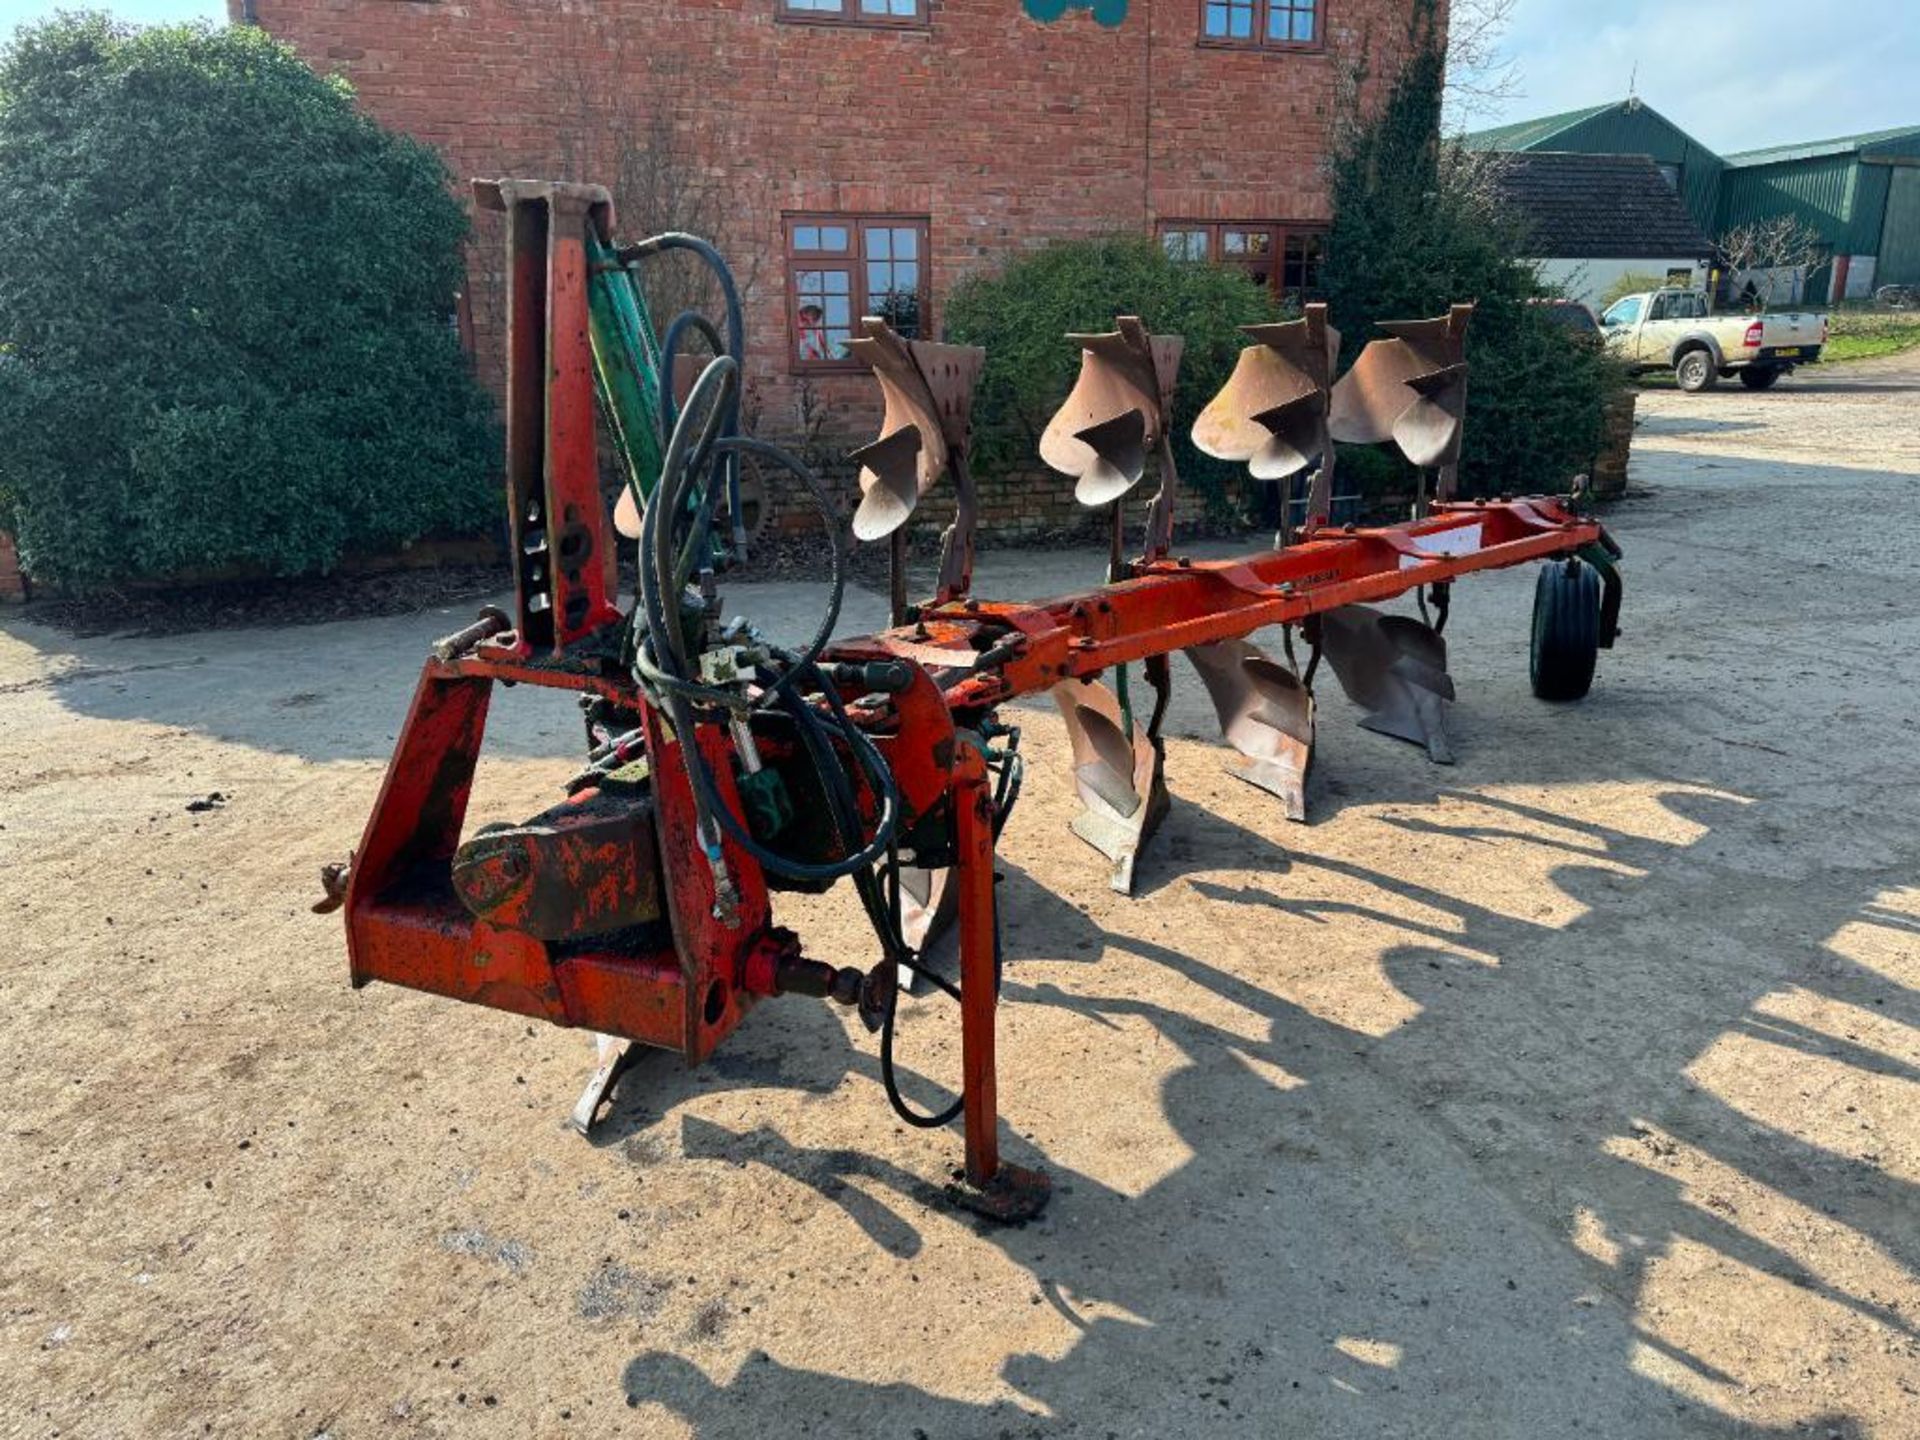 Kverneland LB8 5f reversible plough with hydraulic vari-width, with skimmers, linkage mounted. Seria